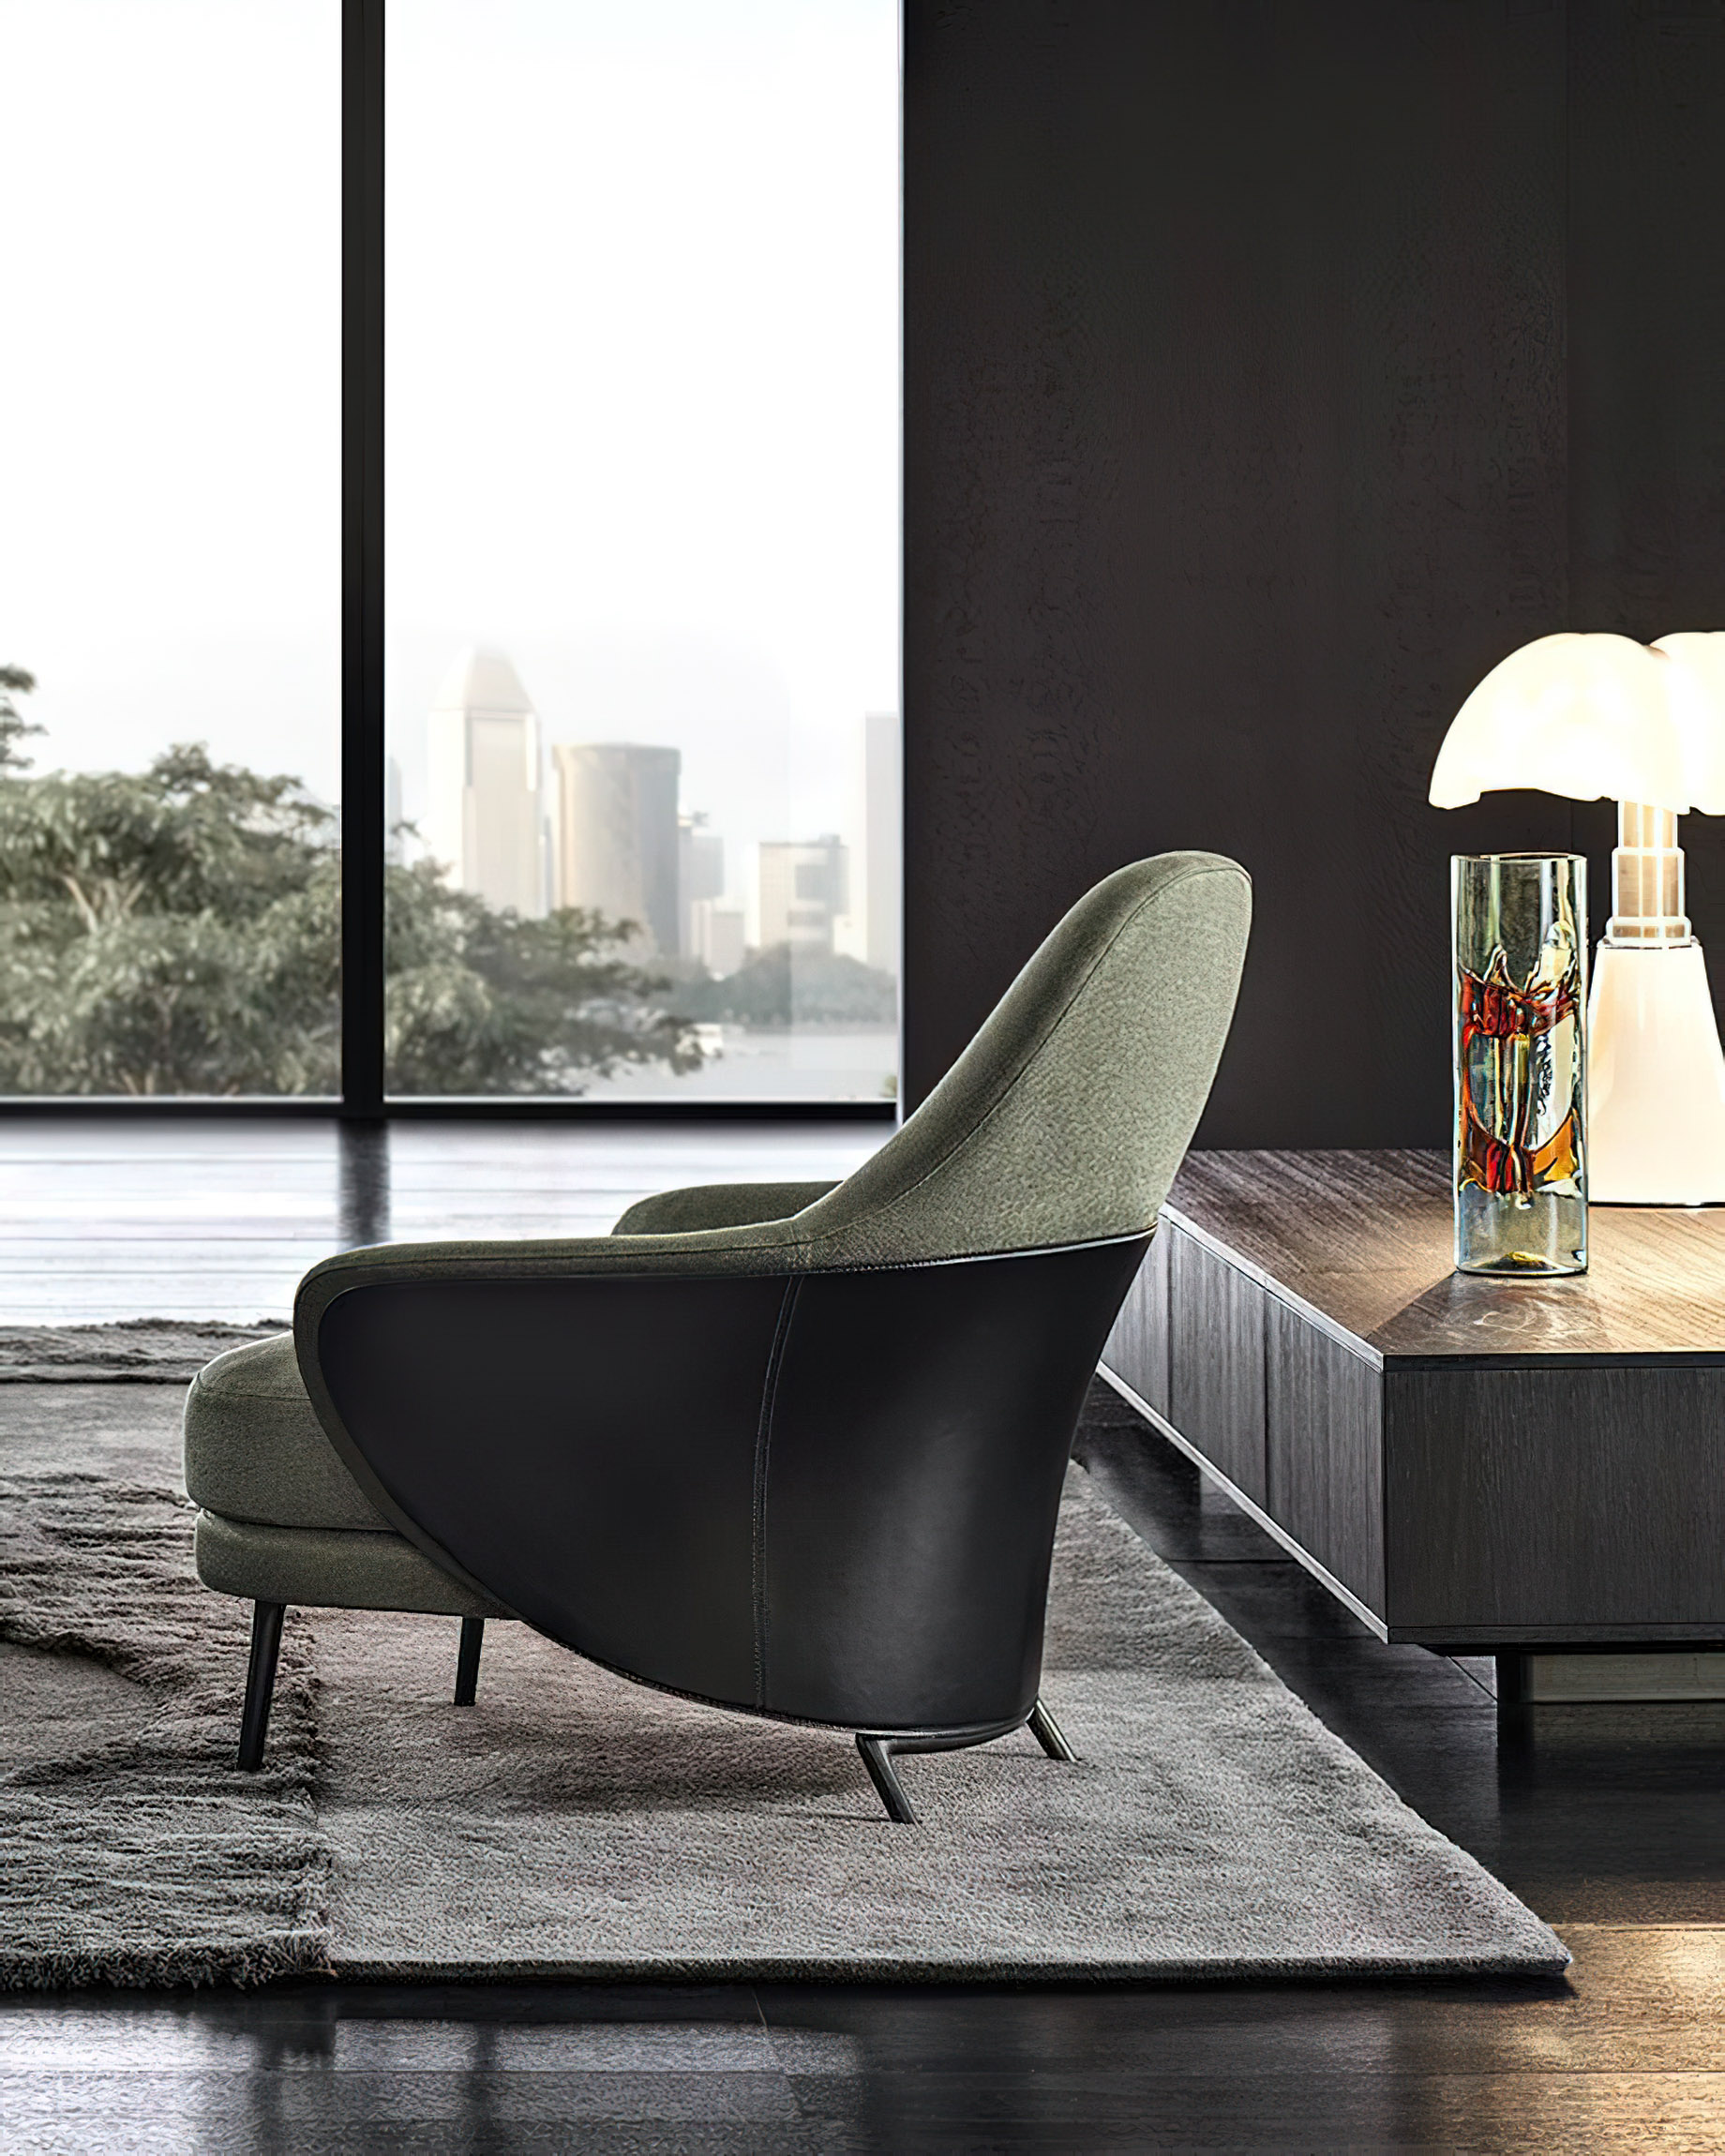 Angie Armchair Collection a Sculptural Gesture by Minotti, Italy – GamFratesi